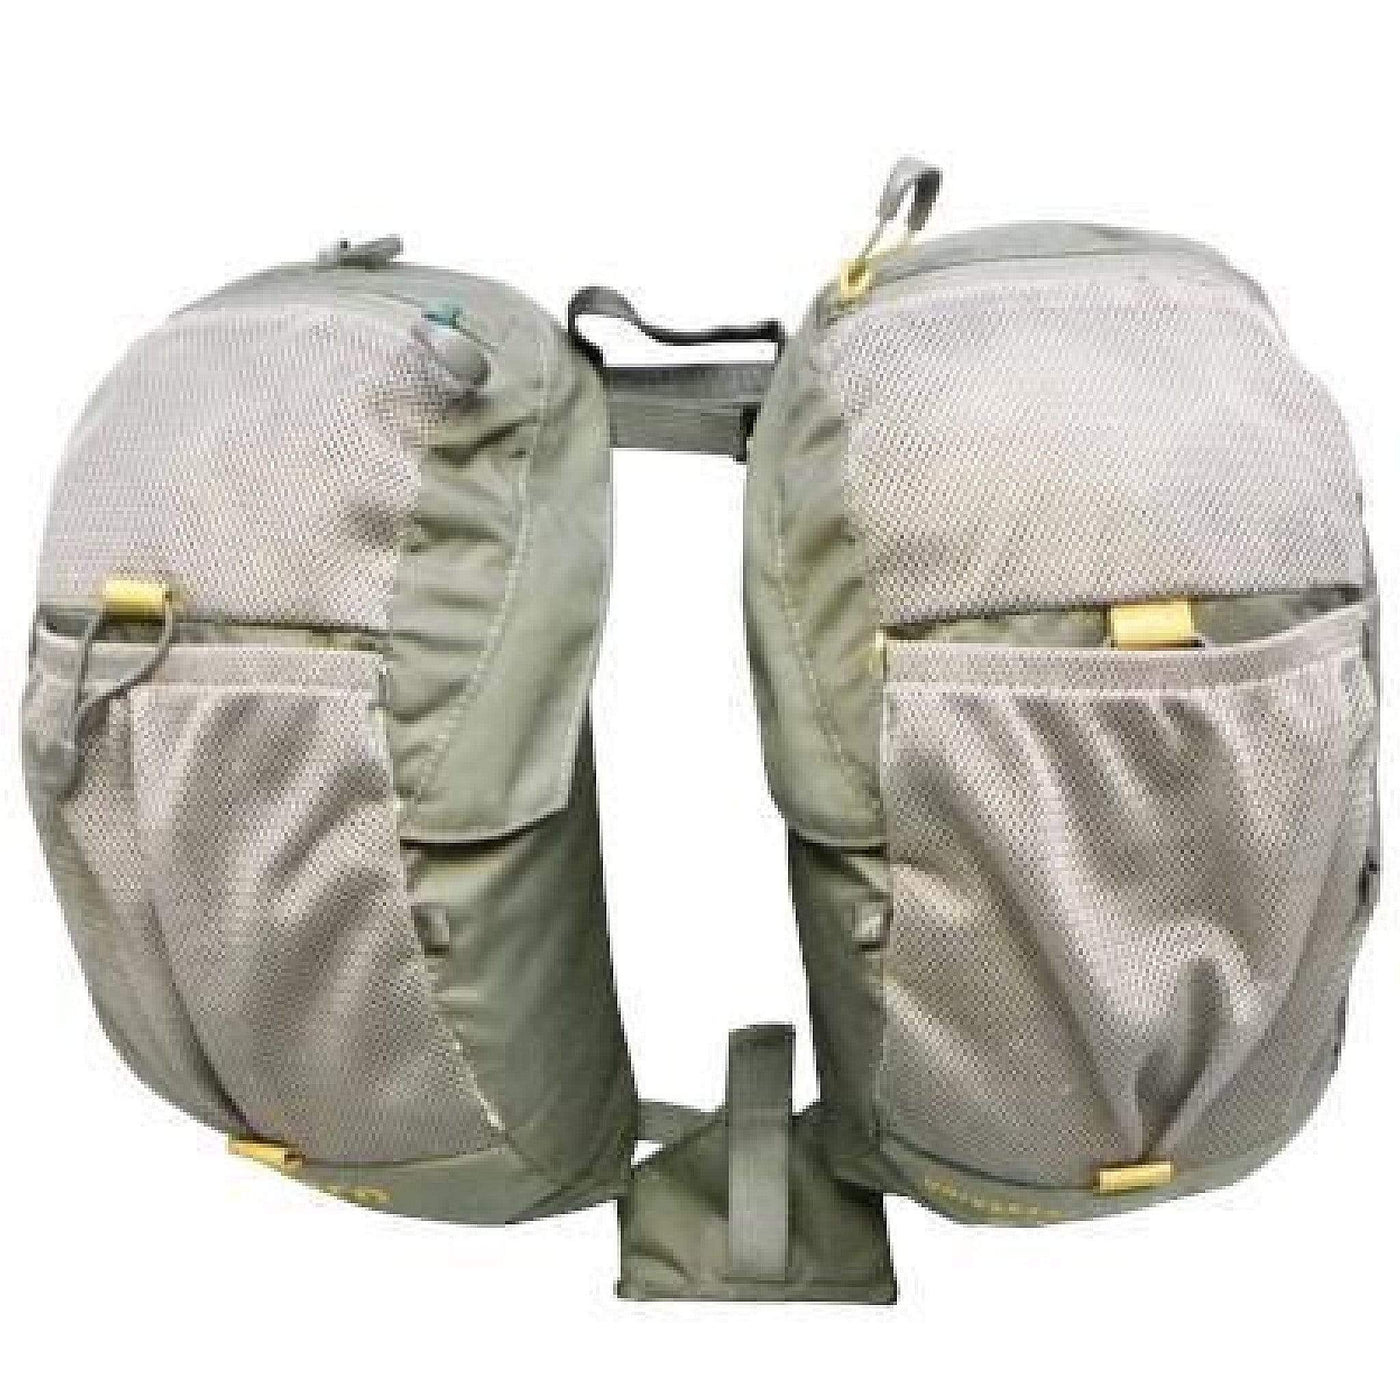 Universal Balance Bags - Fits Any Pack Brand! by Aarn USA - Peak Outdoors - Aarn USA -